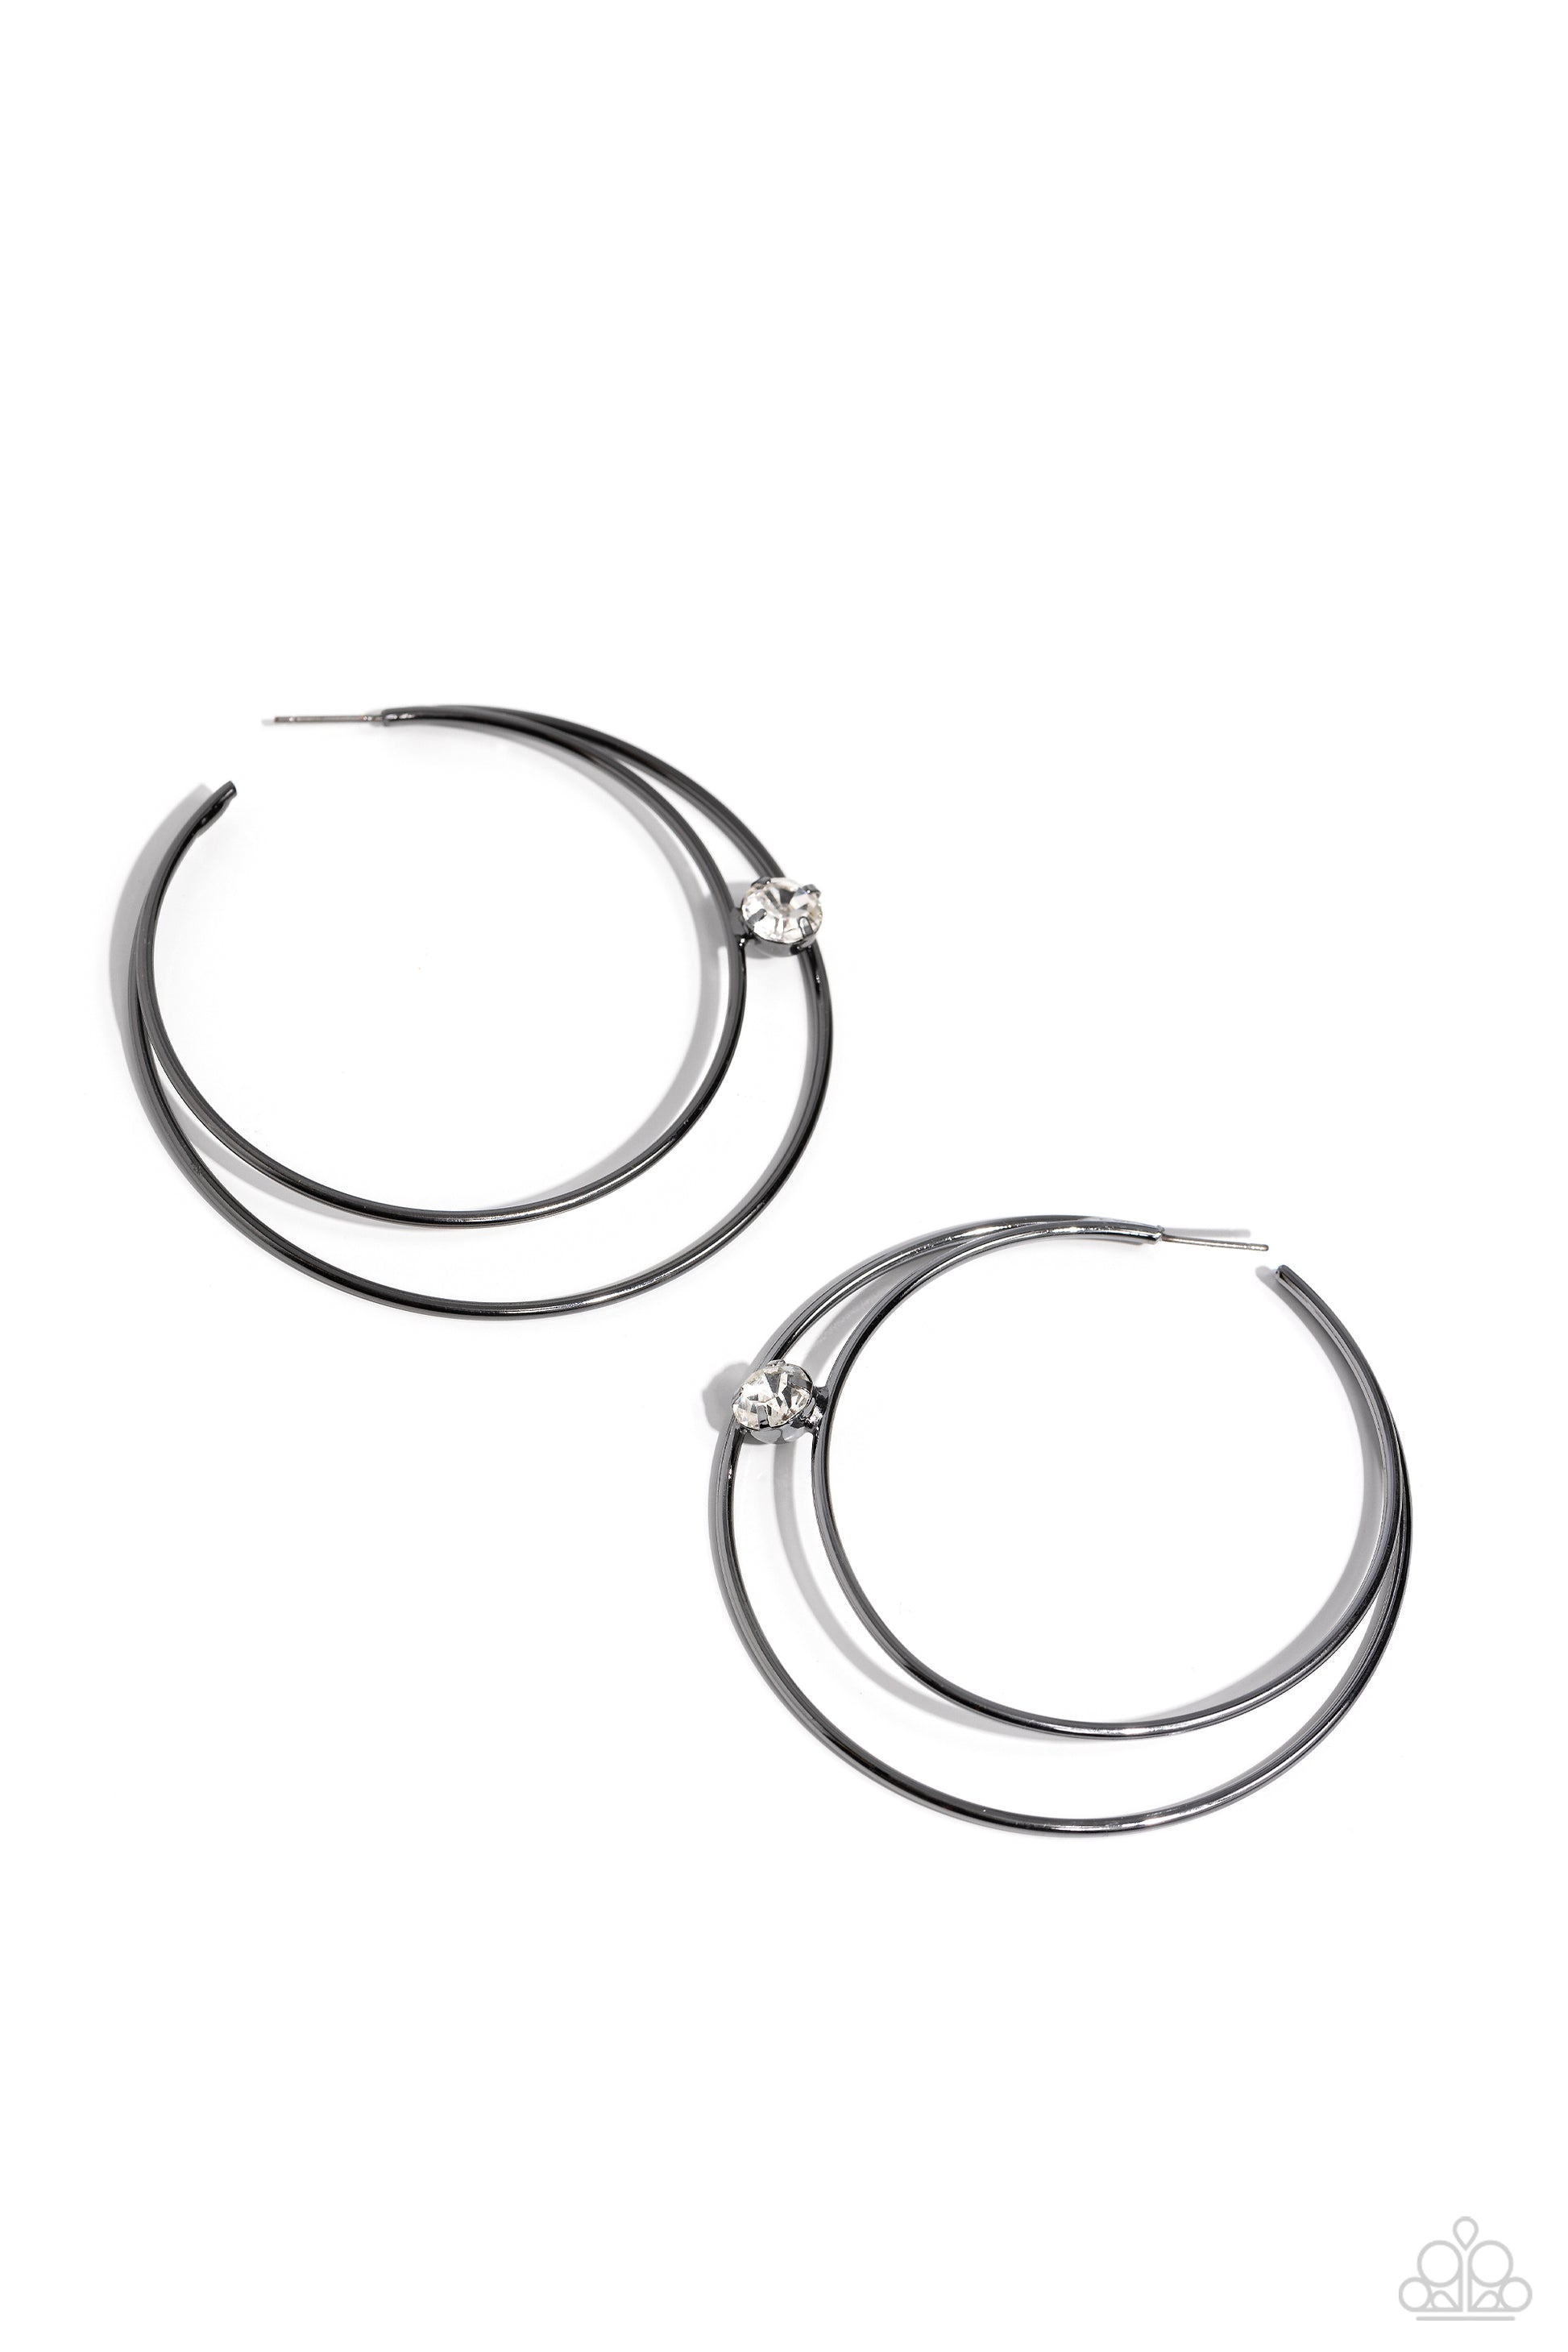 Paparazzi Accessories - Theater Hoop - Black Hoop Earrings lodged between two dainty gunmetal crescent frames that curve into double hoops, a faceted white rhinestone rests for a delicate shimmer near the ear. Earring attaches to a standard post fitting. Hoop measures approximately 2" in diameter. Sold as one pair of hoop earrings.